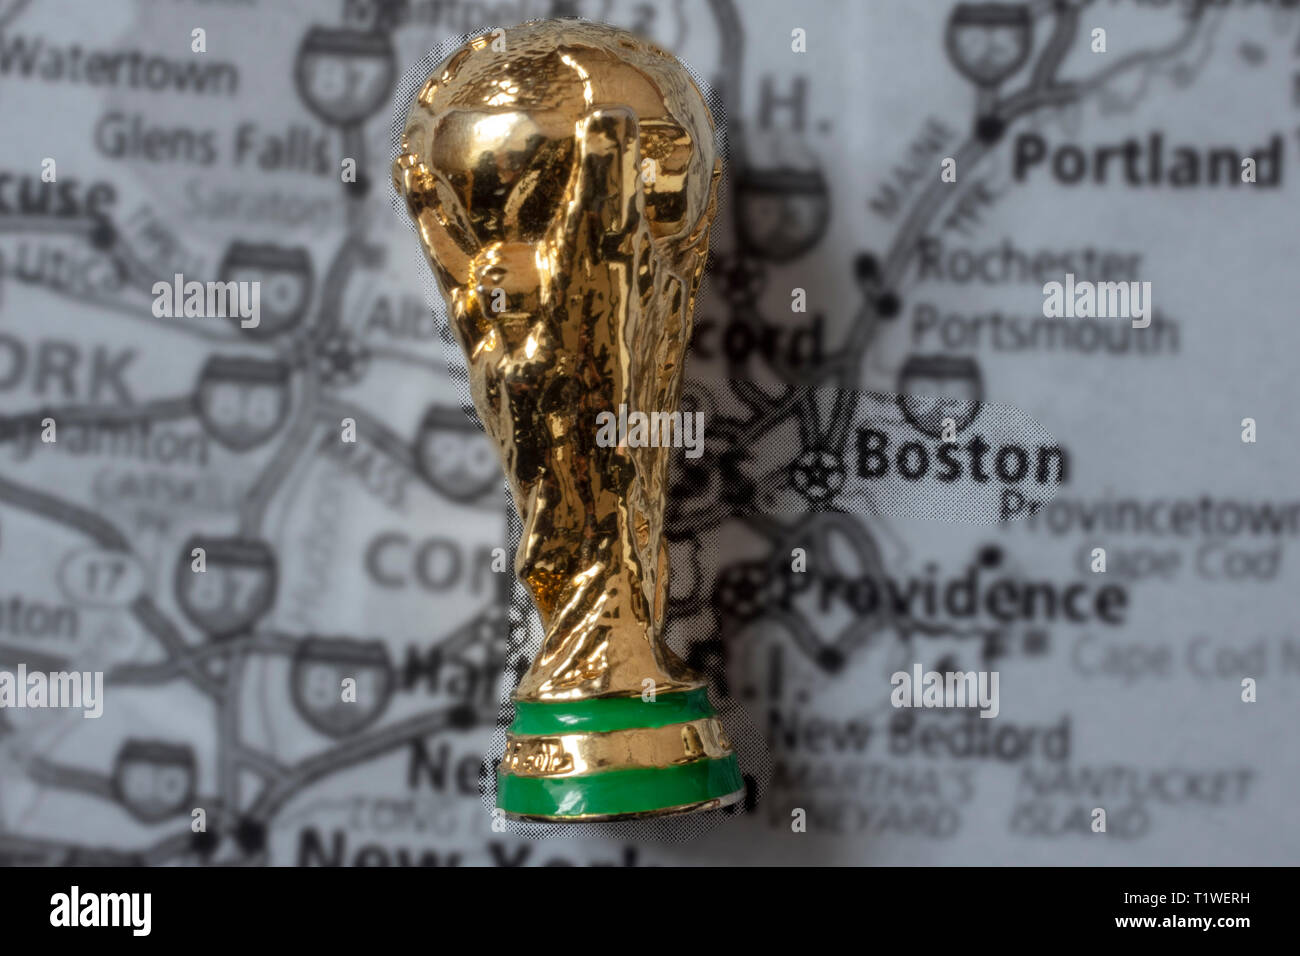 March 4, 2019, Boston, USA. Boston is one of the host cities of FIFA World Cup 2026 which will be held in the USA, Canada and Mexico. Stock Photo